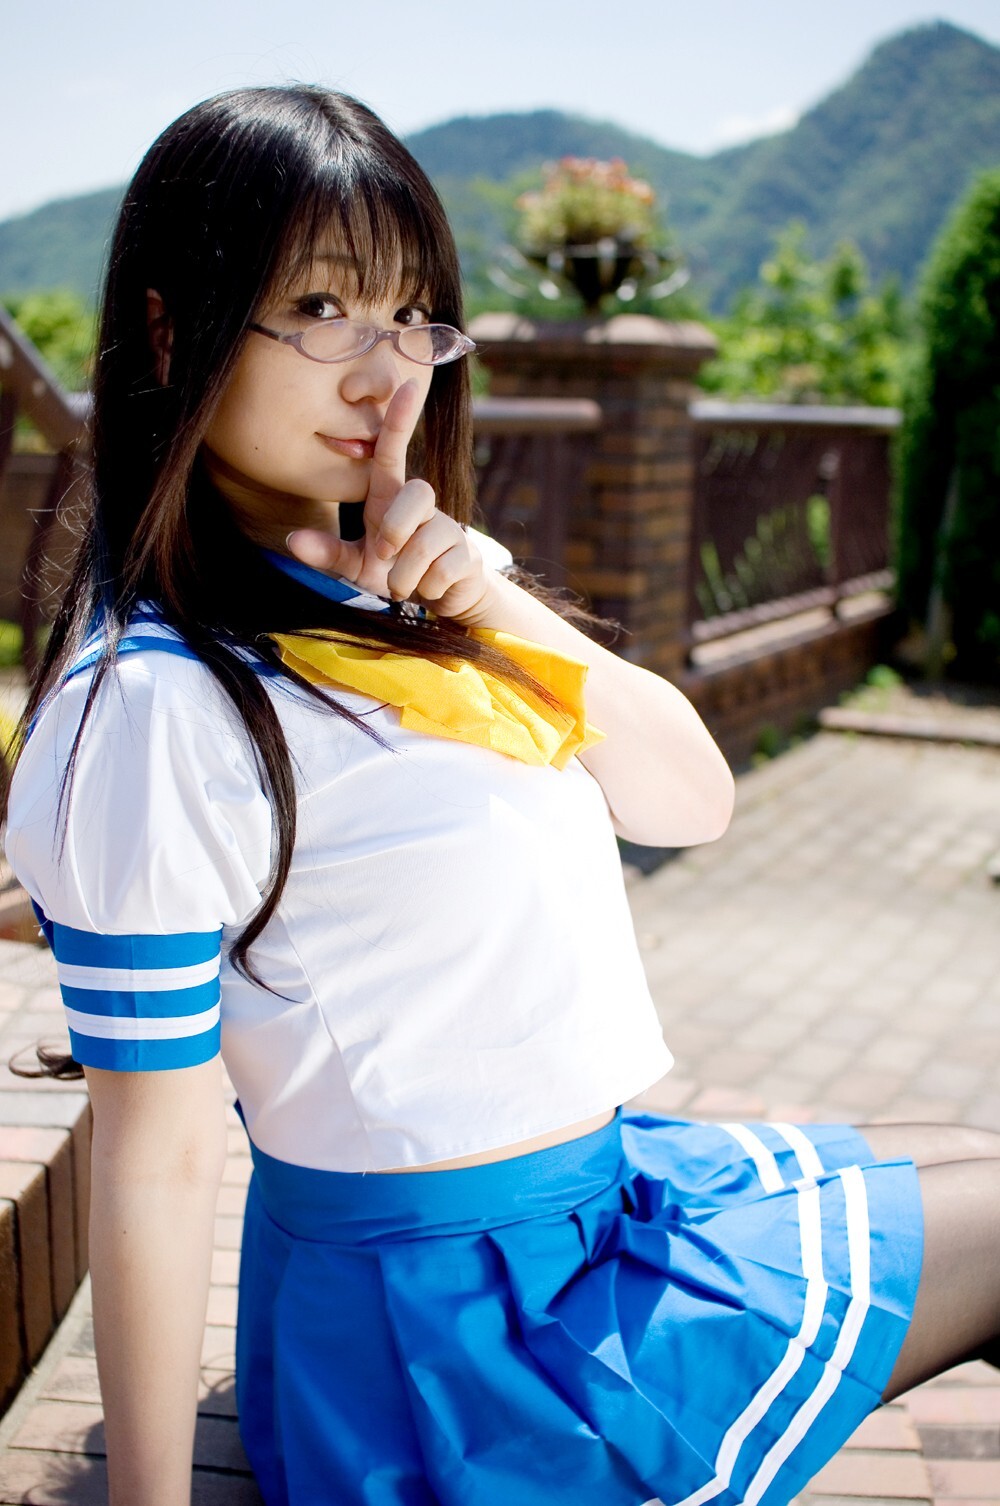 [Cosplay] Lucky Star - Hot Cosplayer